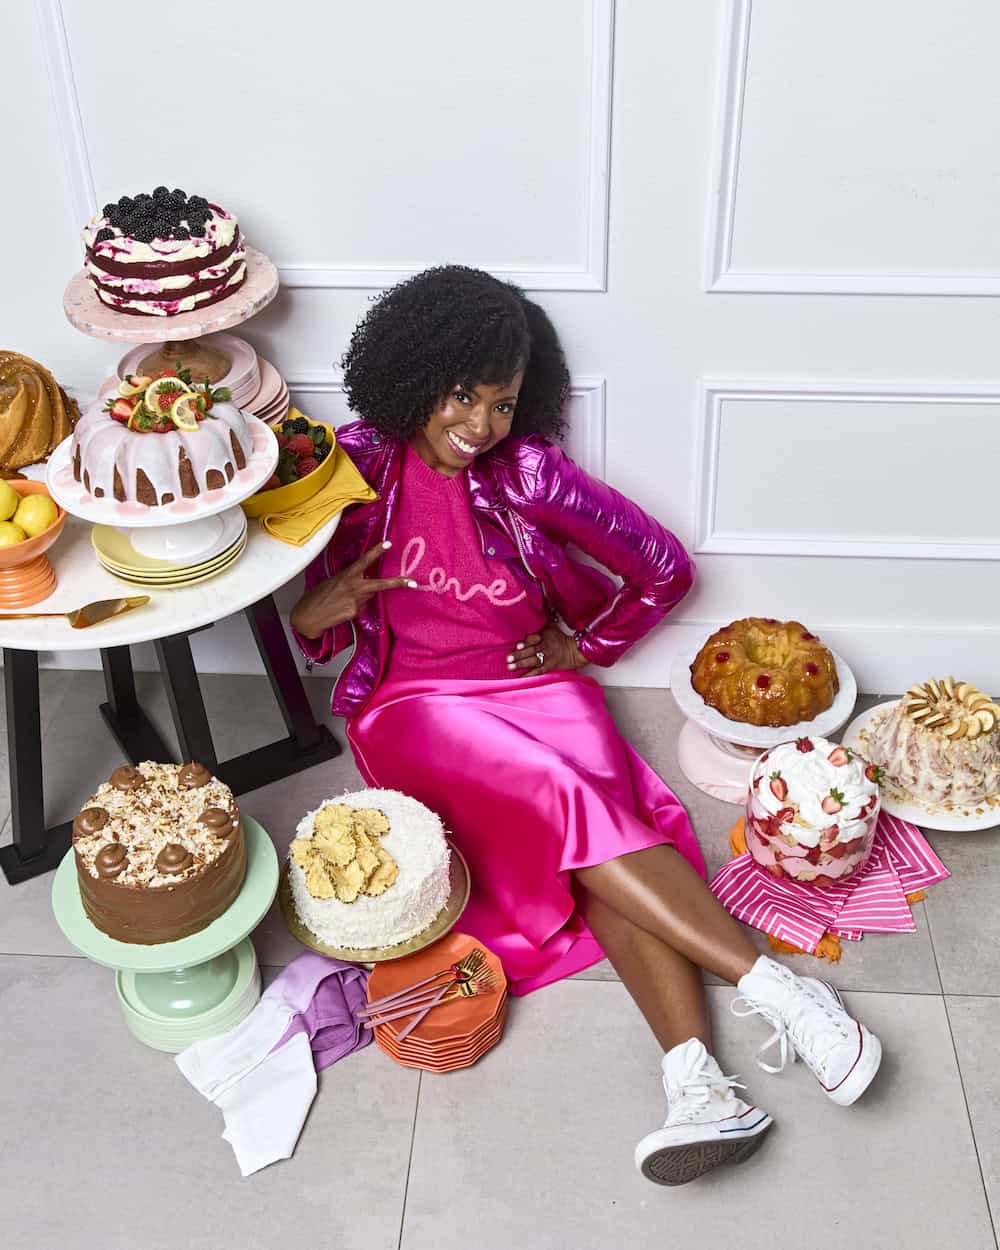 Jocelyn Delk Adams smiling while sitting with amazing pound cakes and layer cakes surrounding her